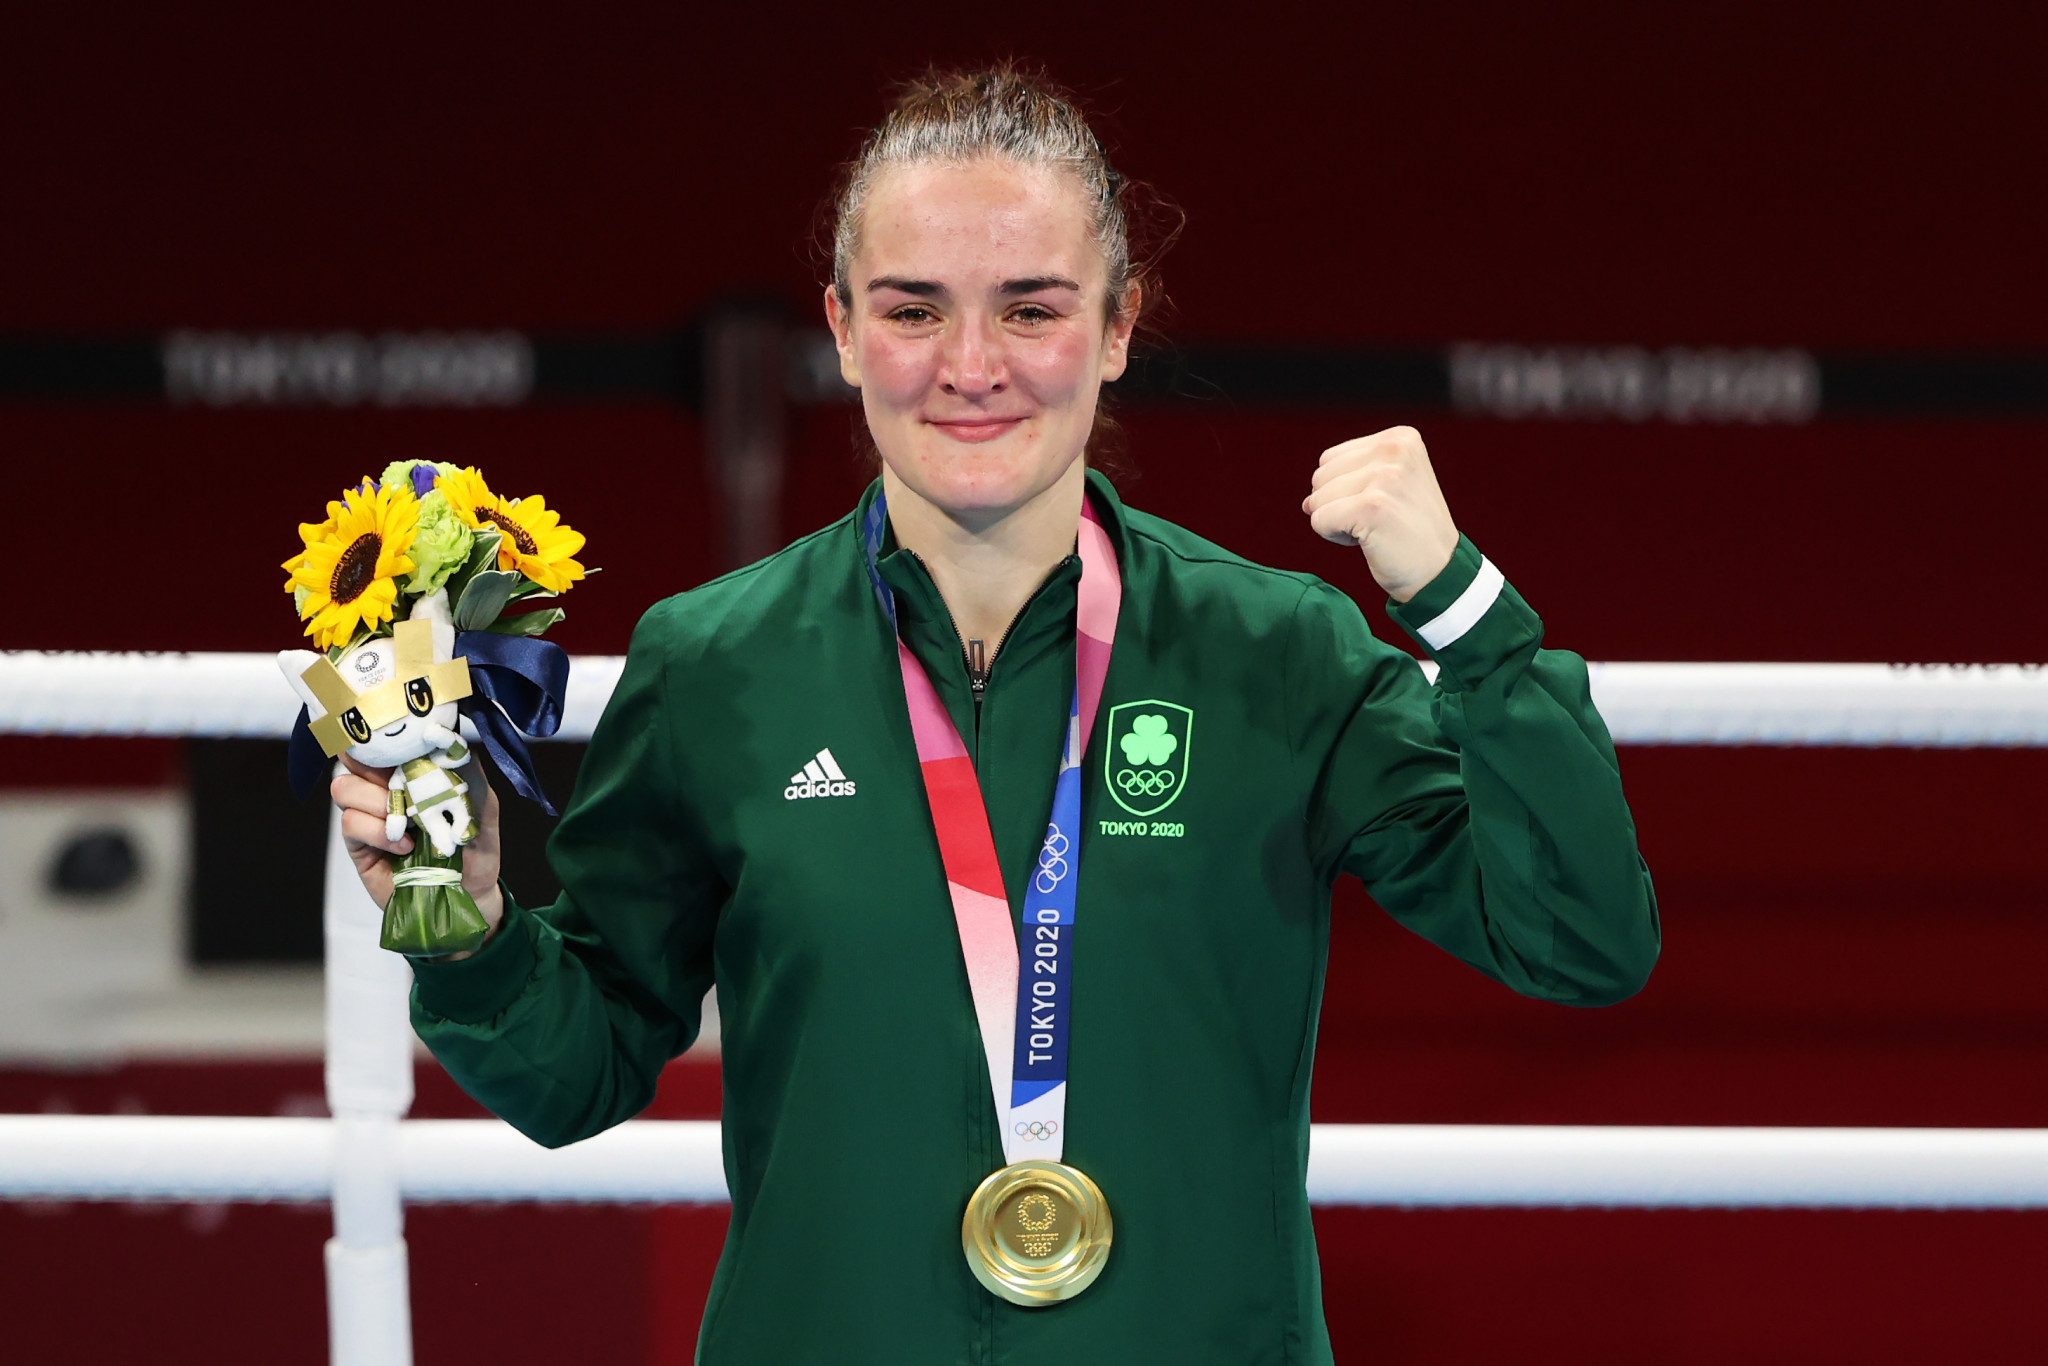 Kellie Harrington is aiming to continue towards Paris 2024 and will not turn professional ©Getty Images